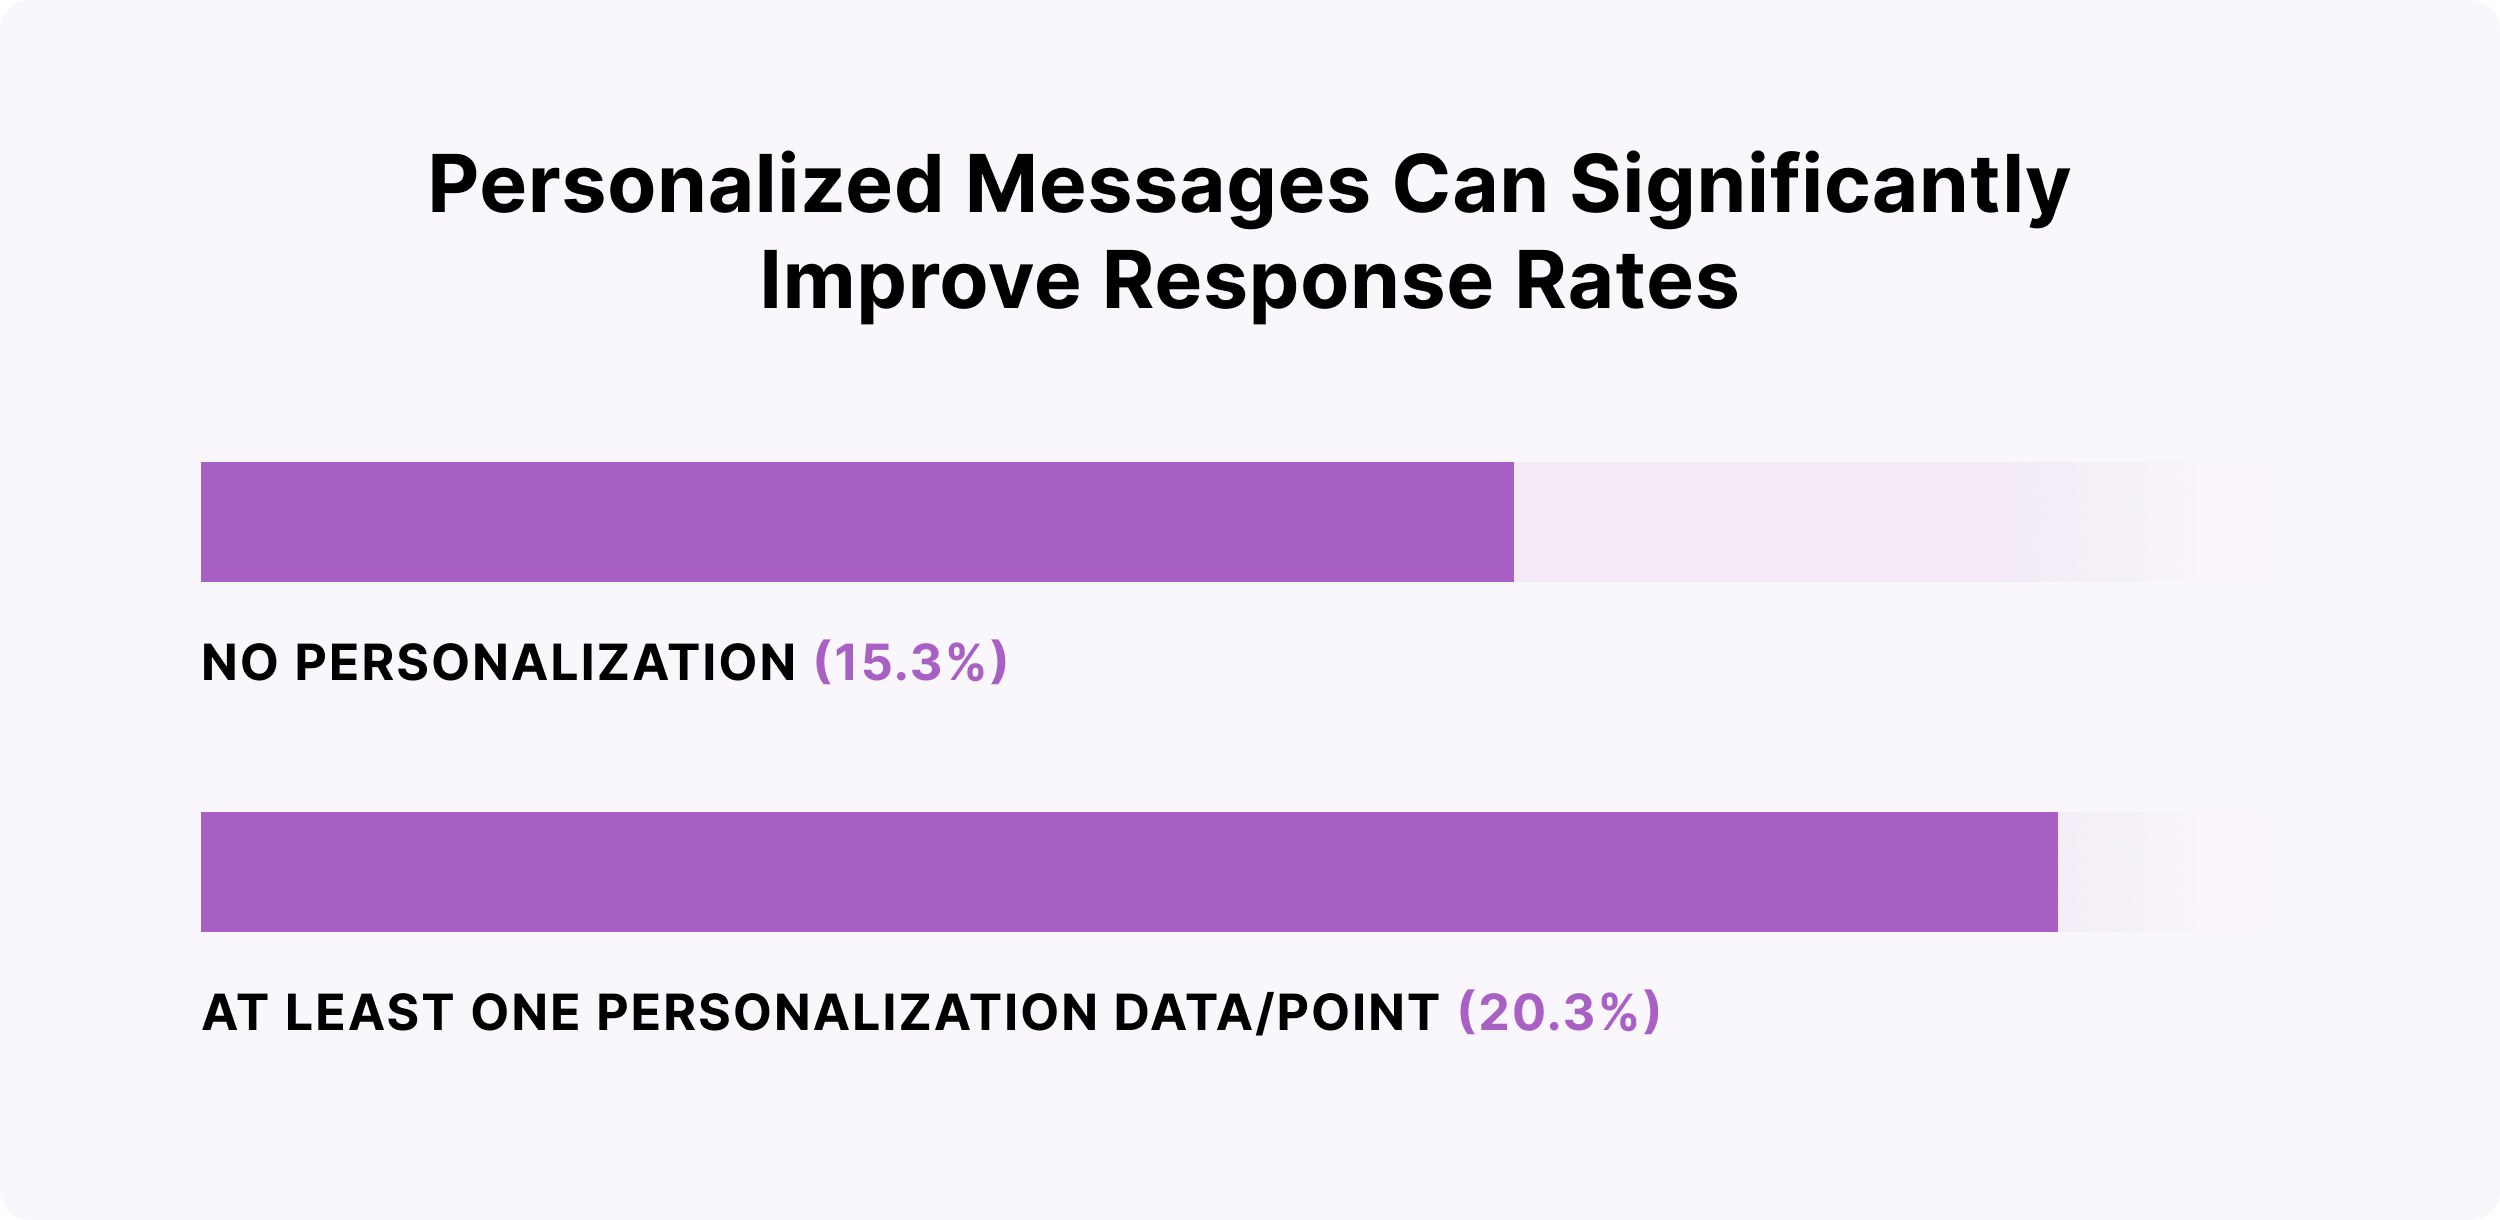 Personalized messages can significantly improve response rates